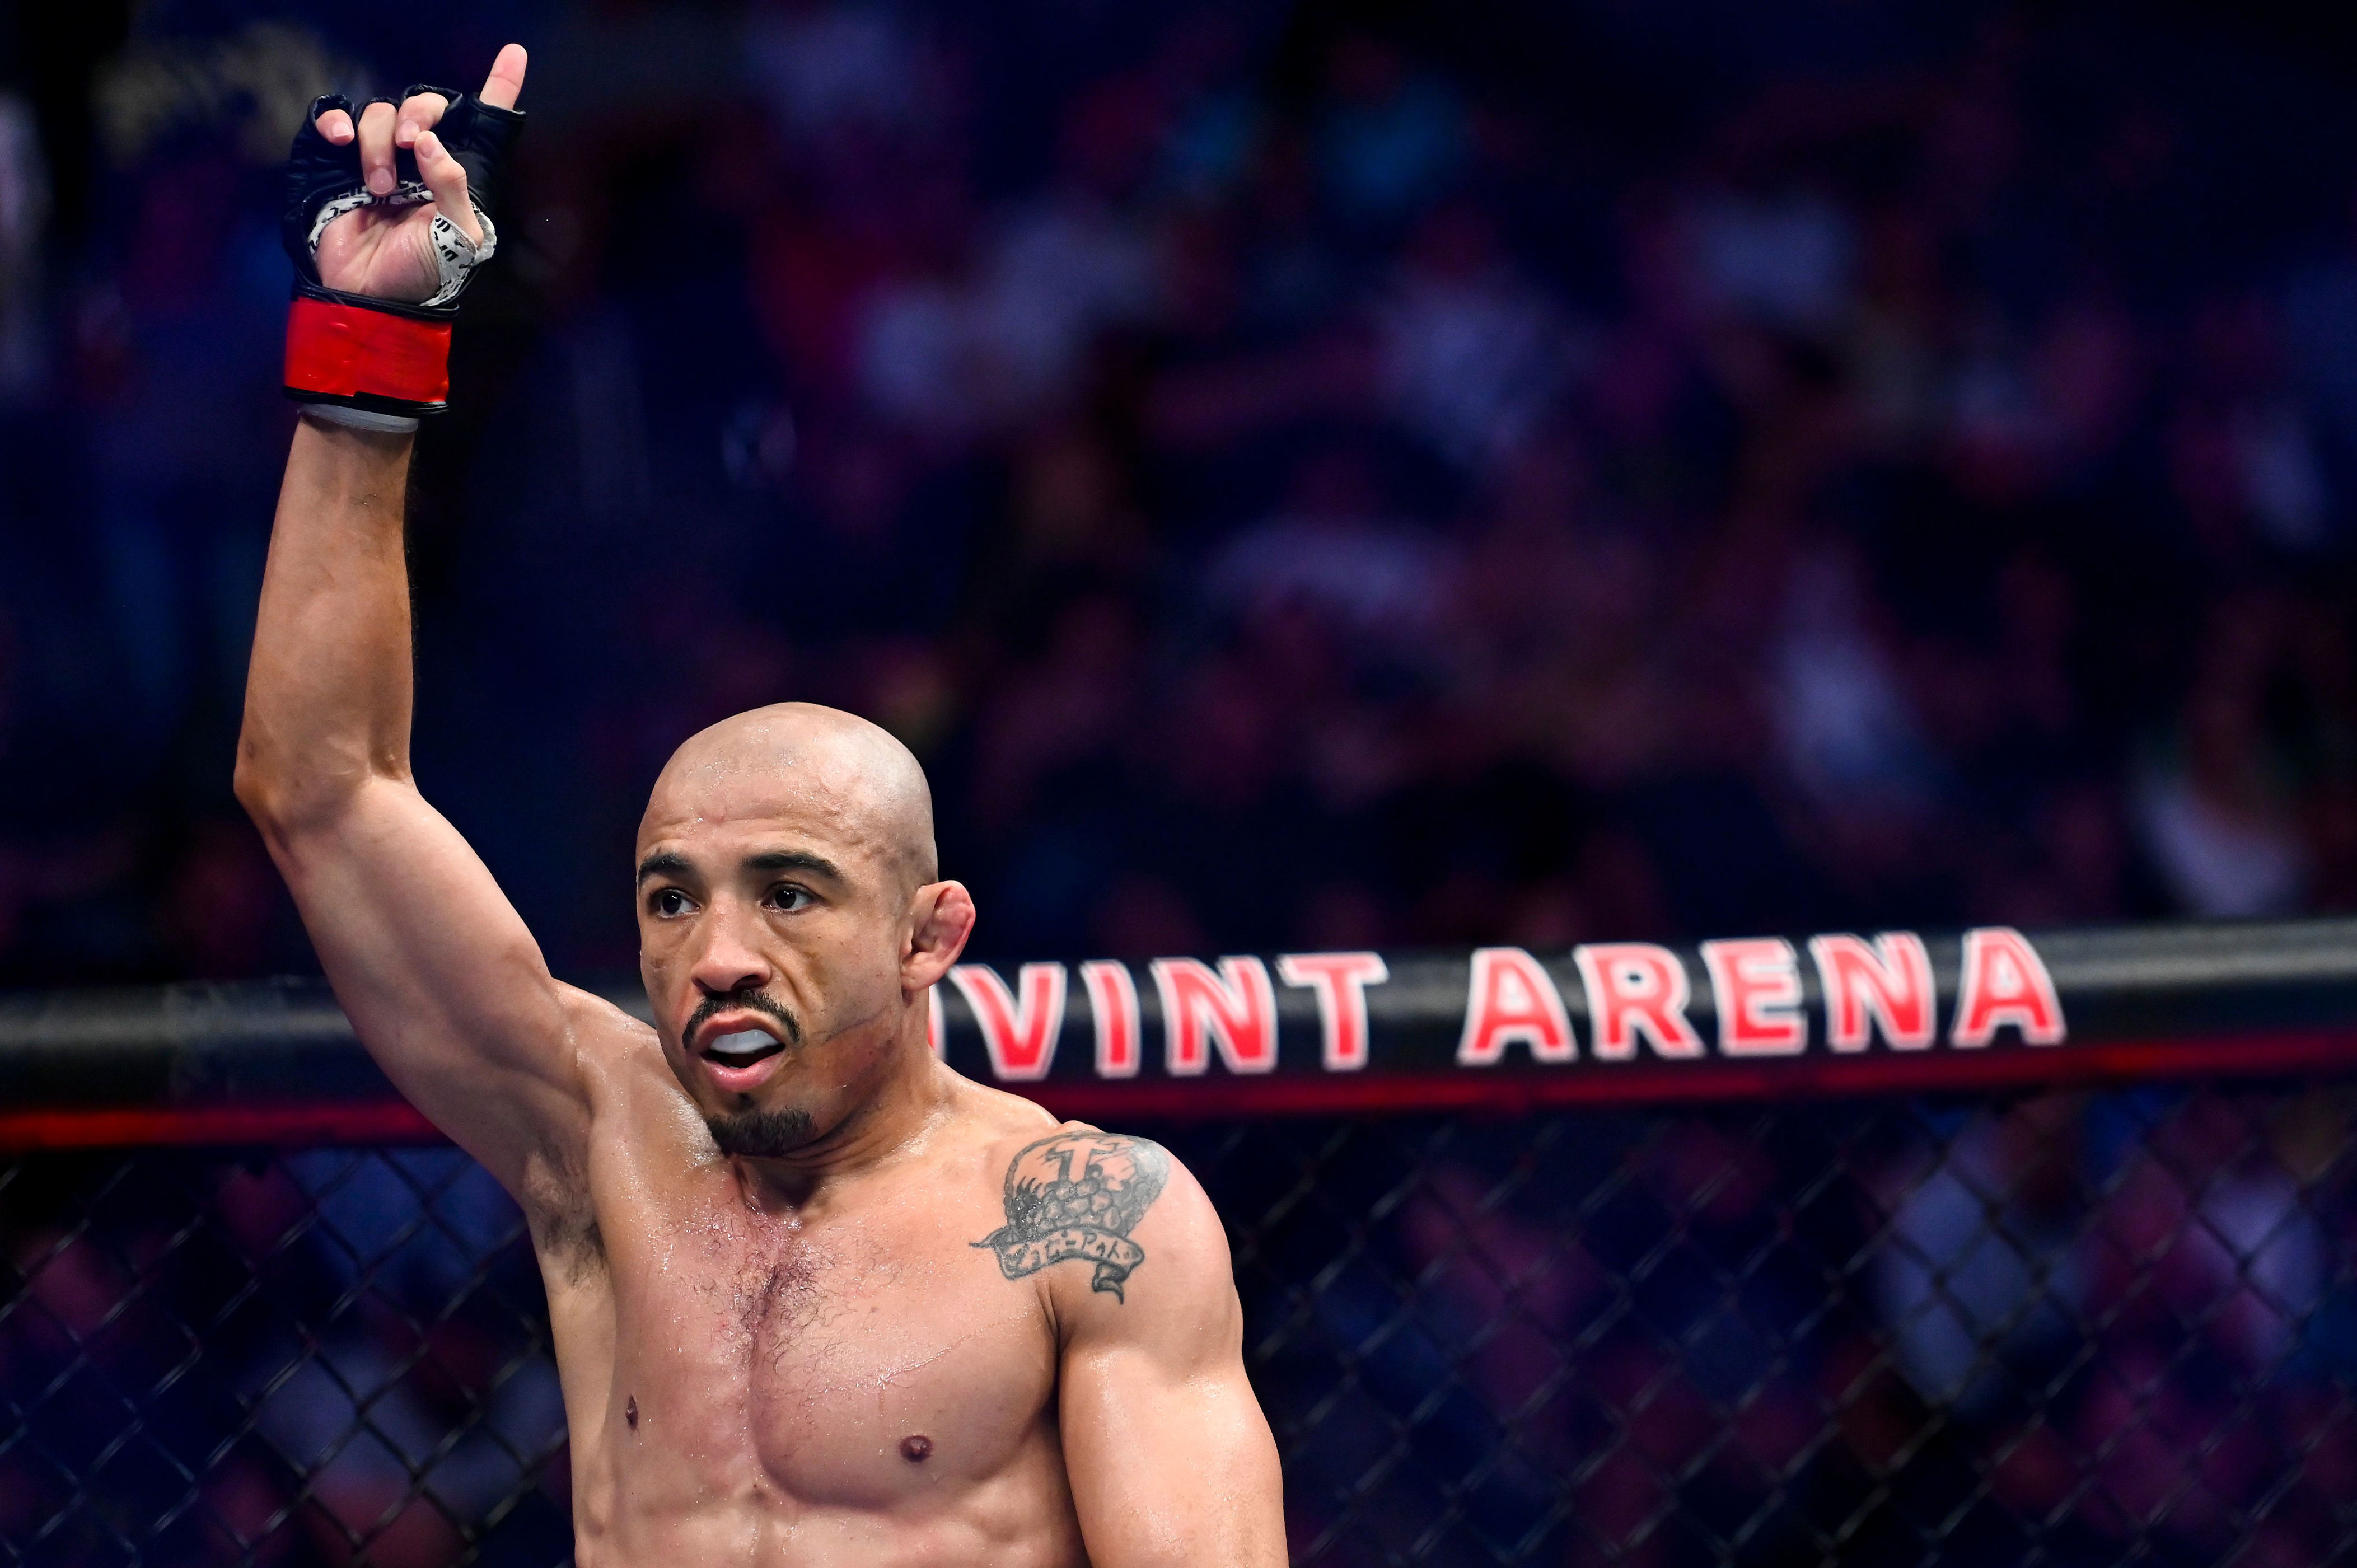 jose aldo wants dana white chat after finishing ufc deal with a big win